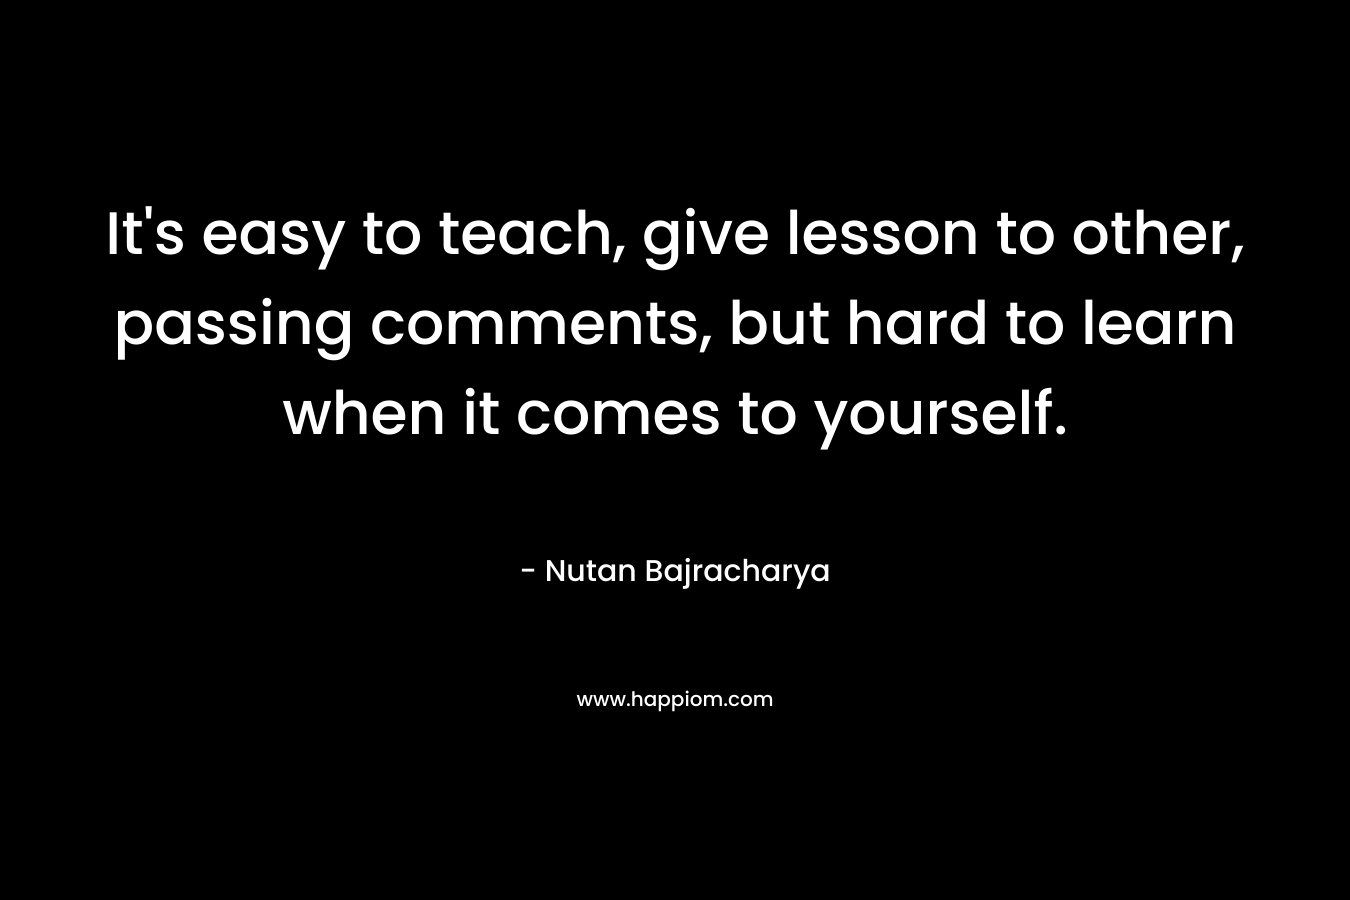 It’s easy to teach, give lesson to other, passing comments, but hard to learn when it comes to yourself. – Nutan Bajracharya